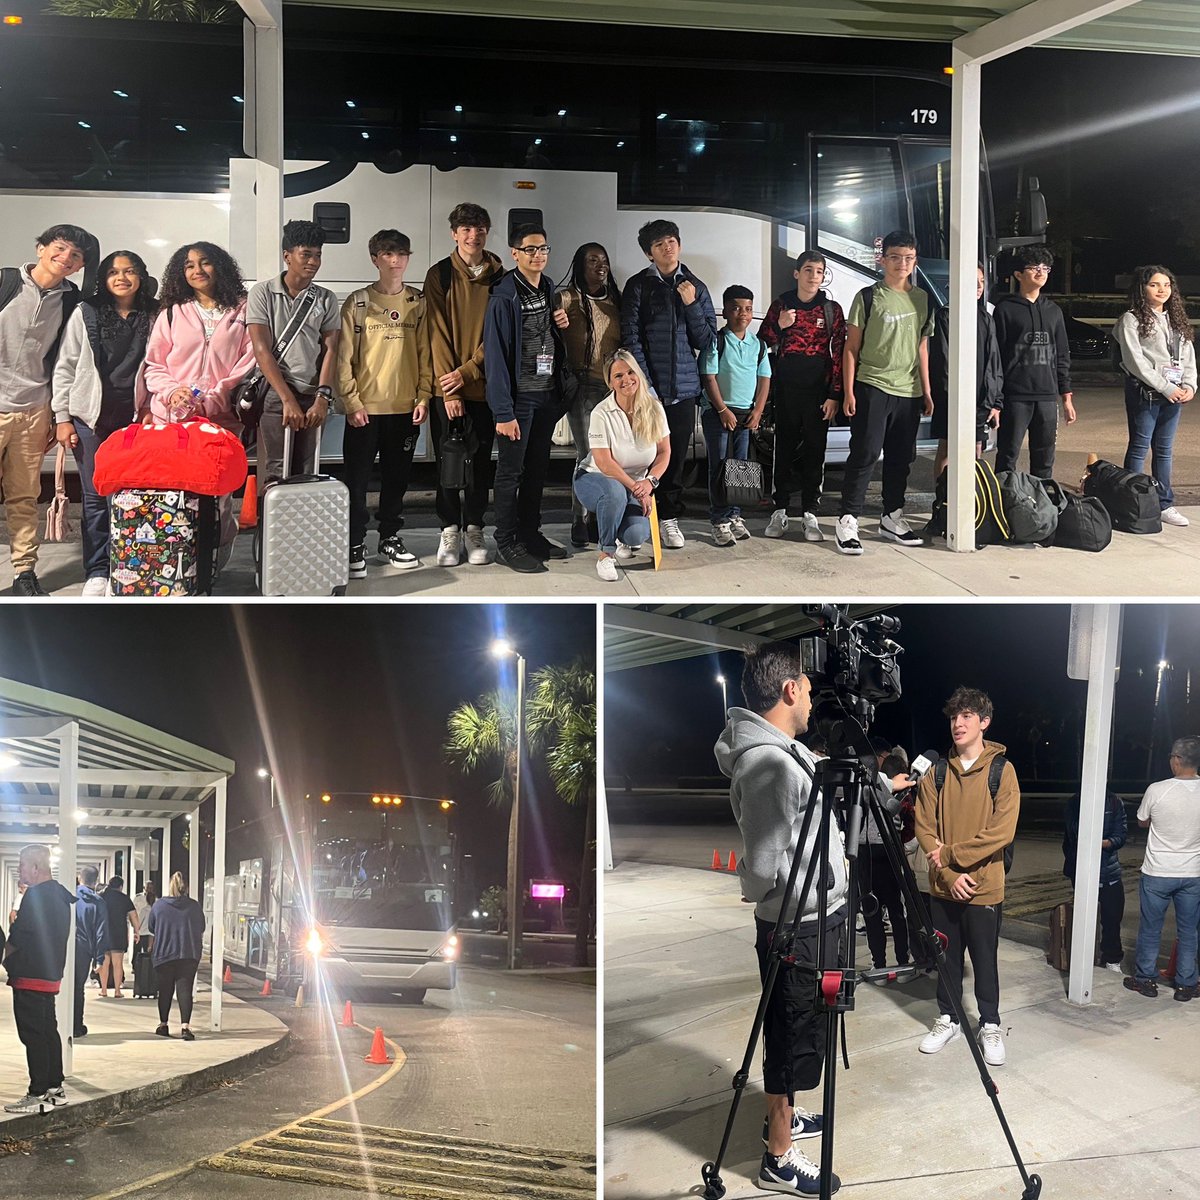 This morning, our students hopped on the bus headed to Tallahassee to participate in Rally to Tally! Stay tuned as we follow them on their journey! @STMSPrincipalT @CasablancaMs @APLendickSTMS @NadineMSmithh @BCPS_South